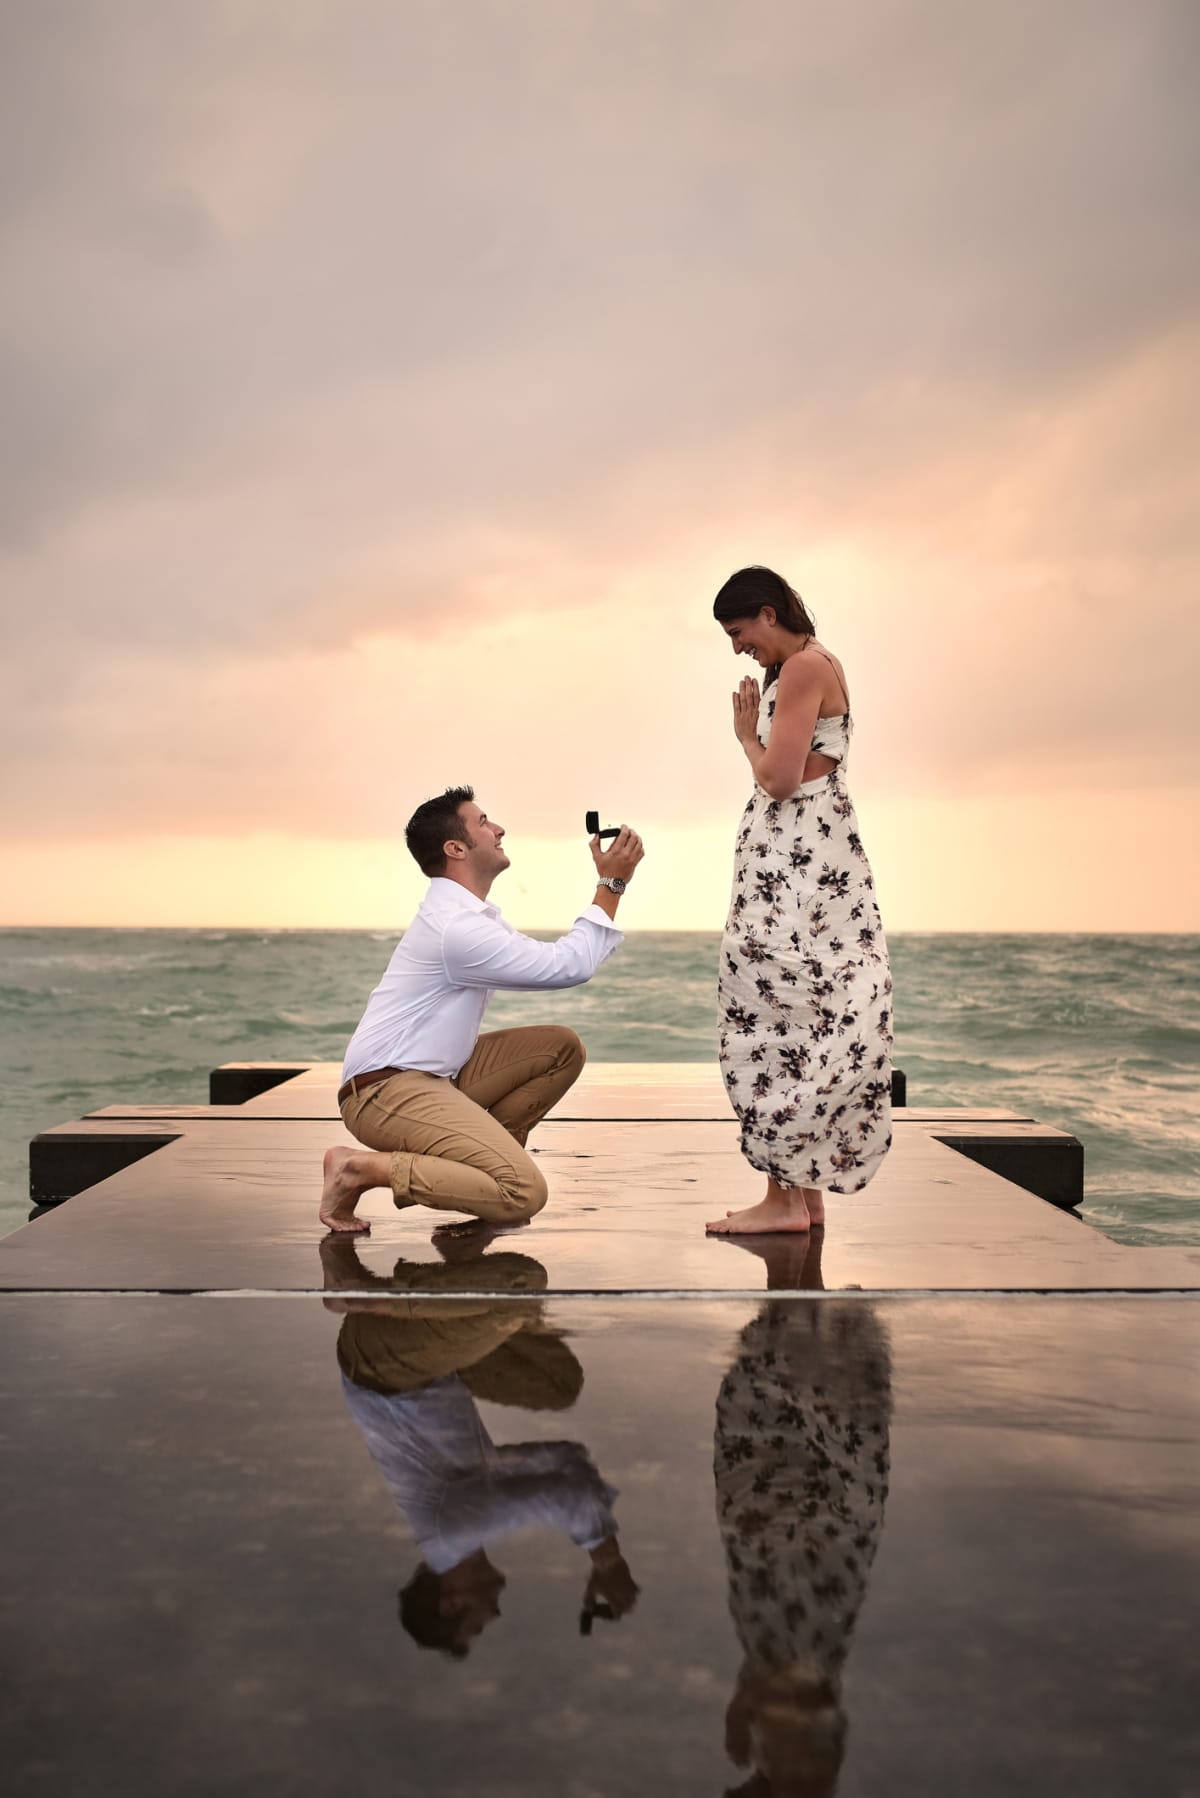 Full length shot of a handsome young man proposing to his girlfriend on the jetty at the beach